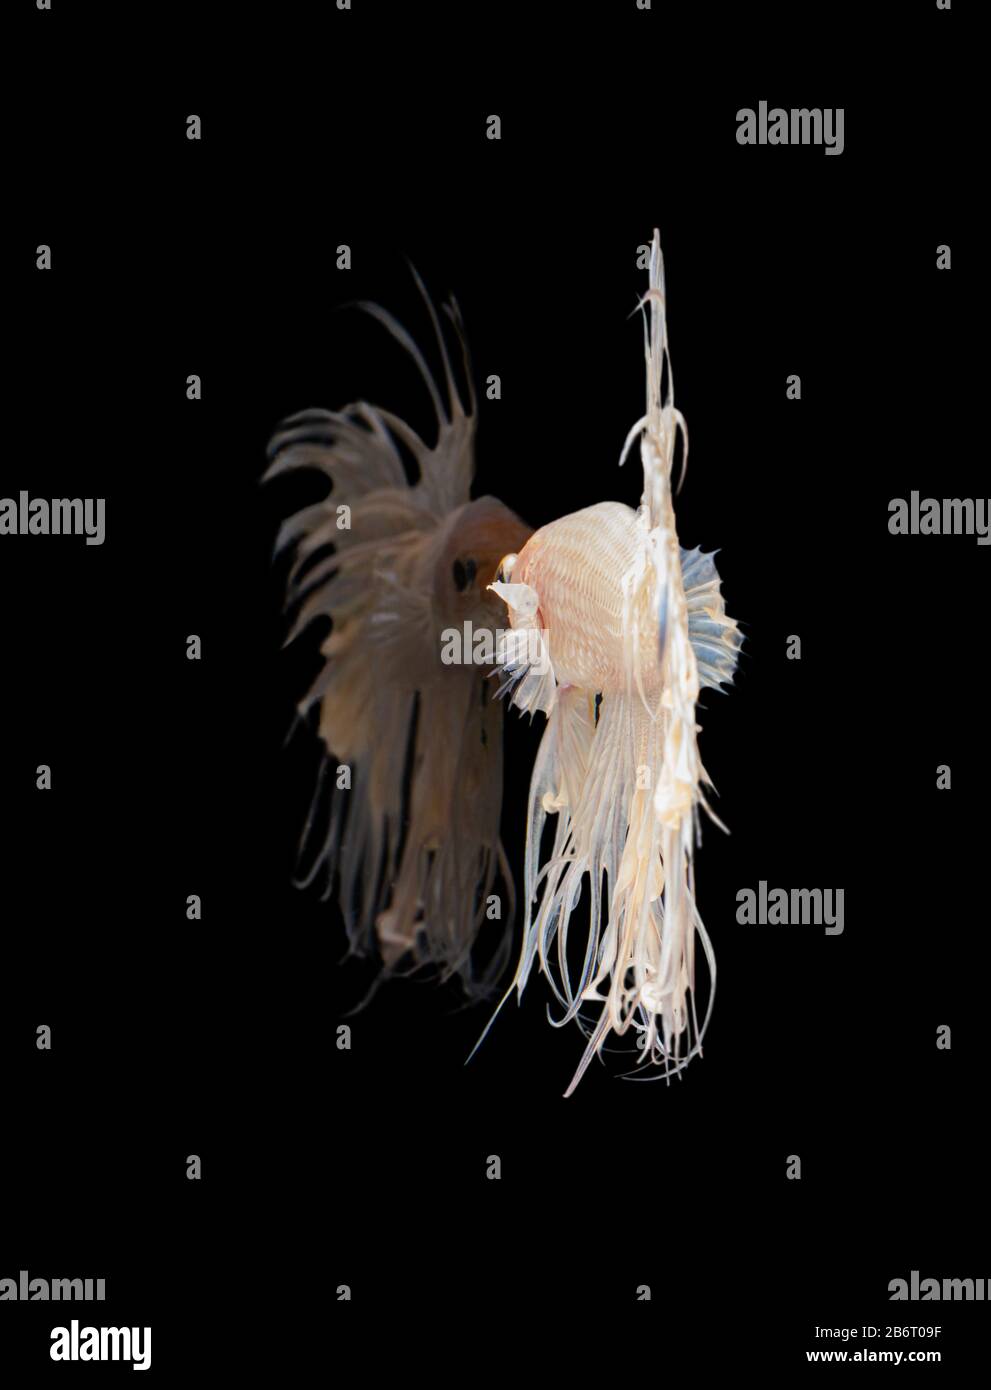 Beautiful white crowntail betta fish siamese fighting fish with reflection  isolated on black background. Stock Photo